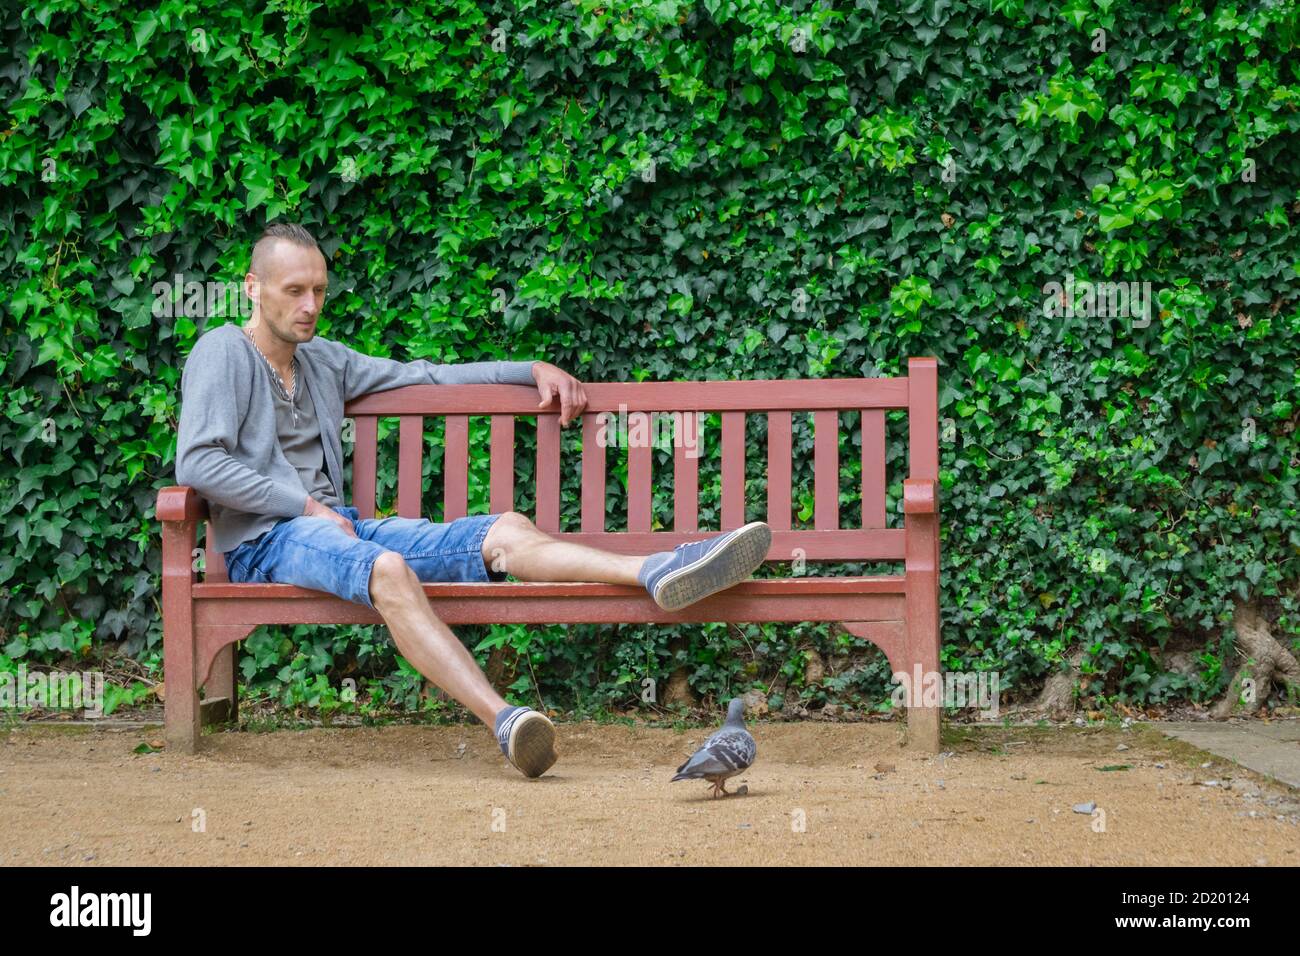 Lonely Man Sitting Alone On Bench And Looking At Pigeon Loneliness Concept Stock Photo Alamy